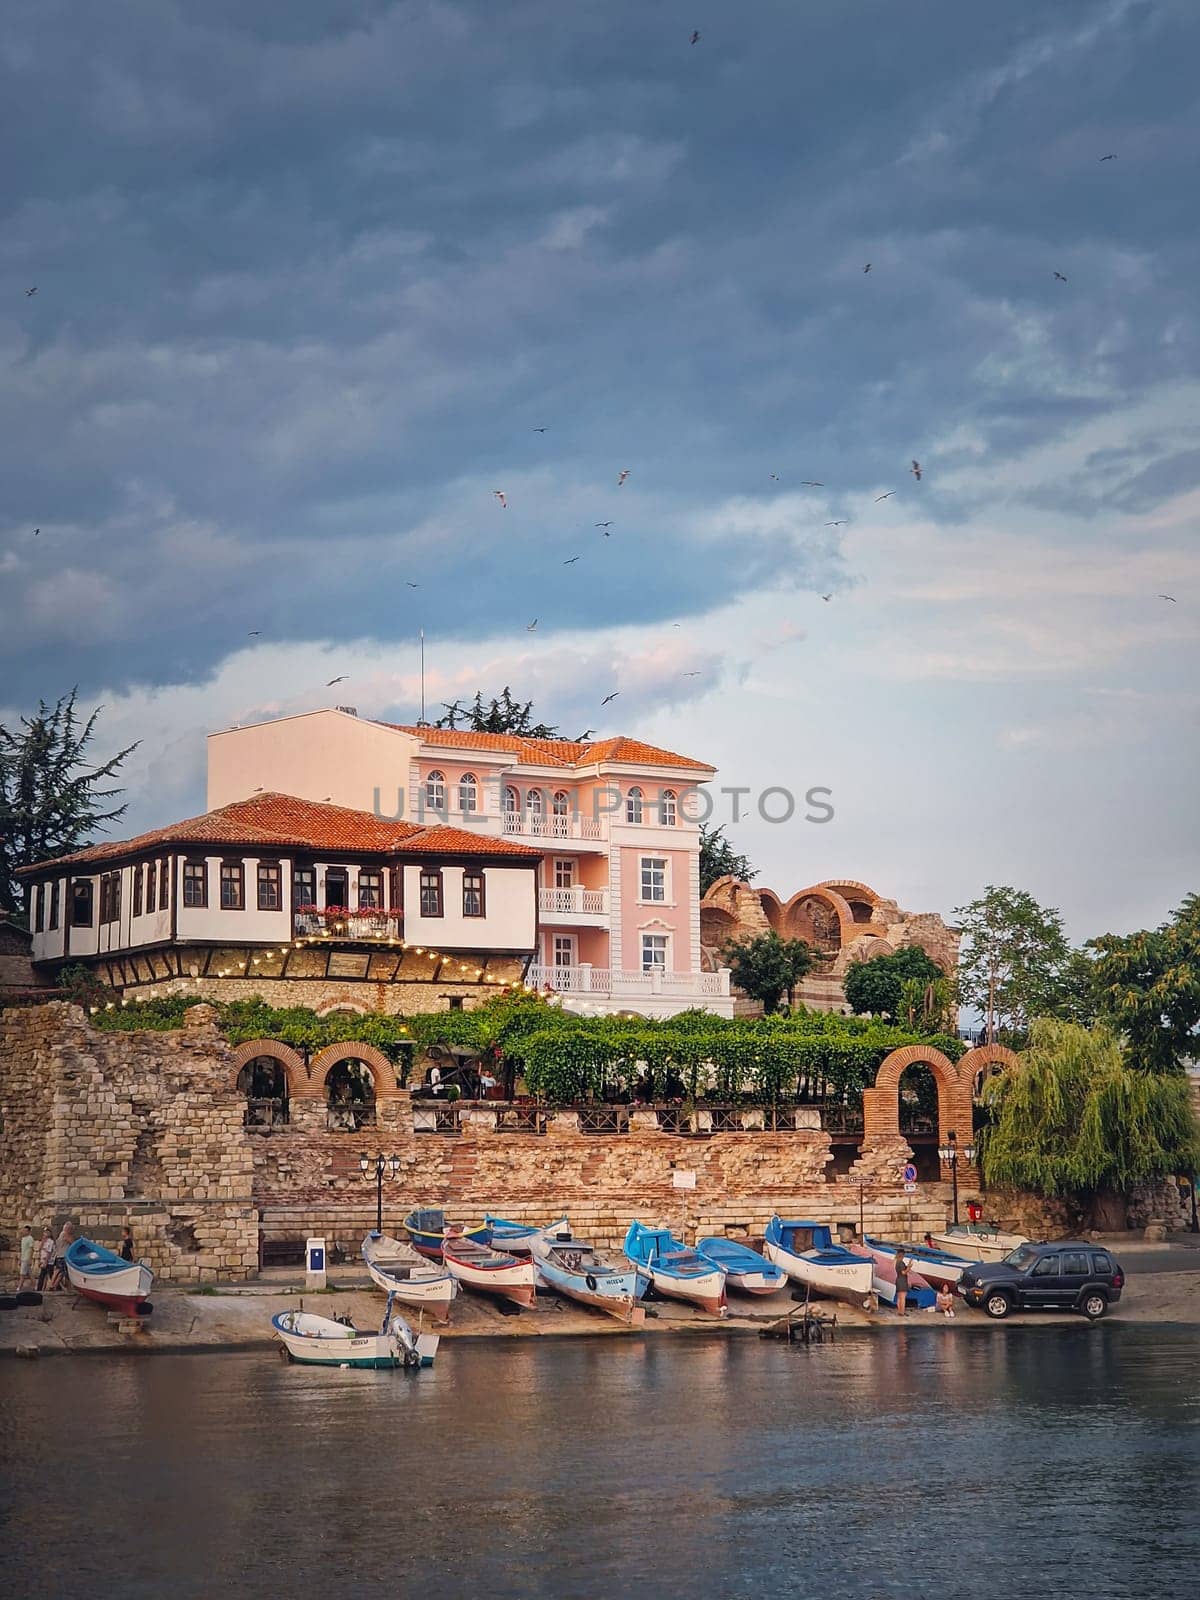 The old town of Nessebar, UNESCO world heritage on the Black Sea coastline, Burgas Region, Bulgaria. Sightseeing view with a mixture of ancient ruins and modern hotel resort on the coast by psychoshadow